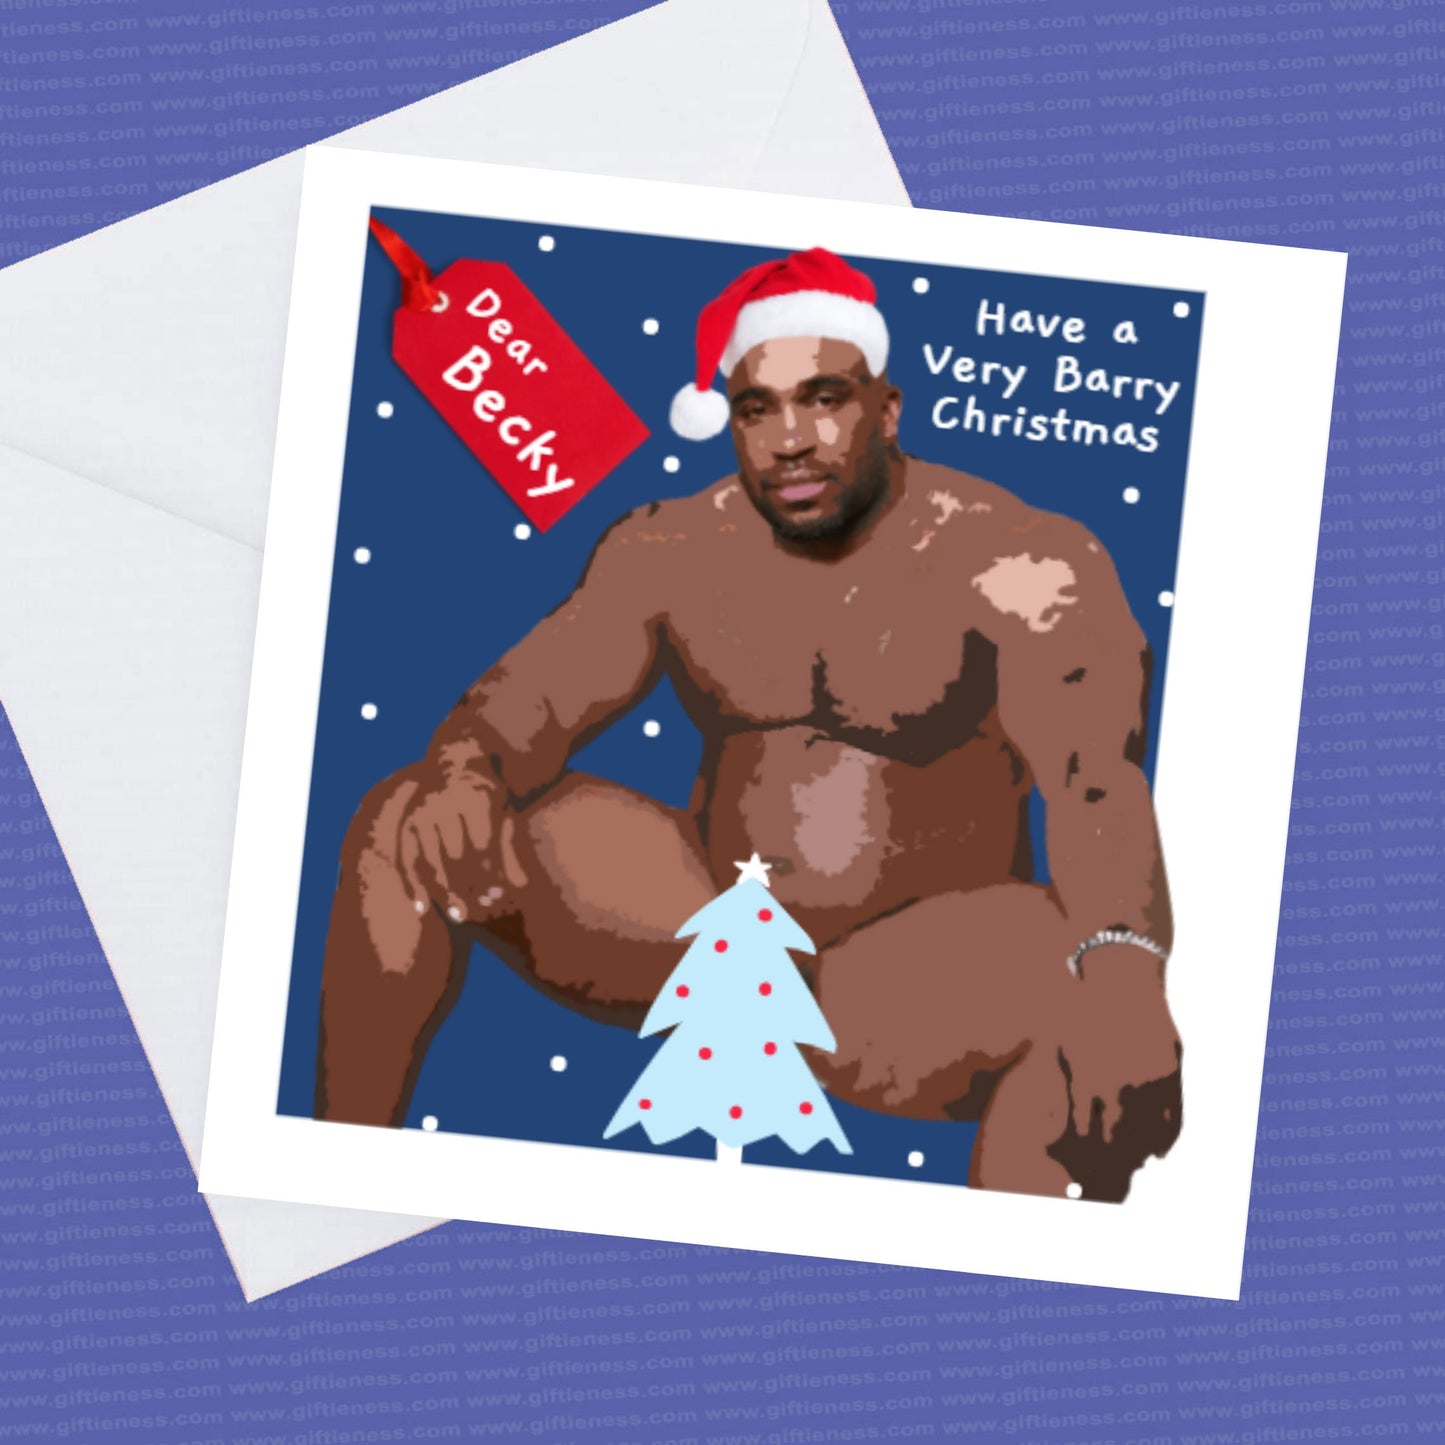 Personalised Barry Christmas Card, Have a very Barry Christmas, funny Barry Card